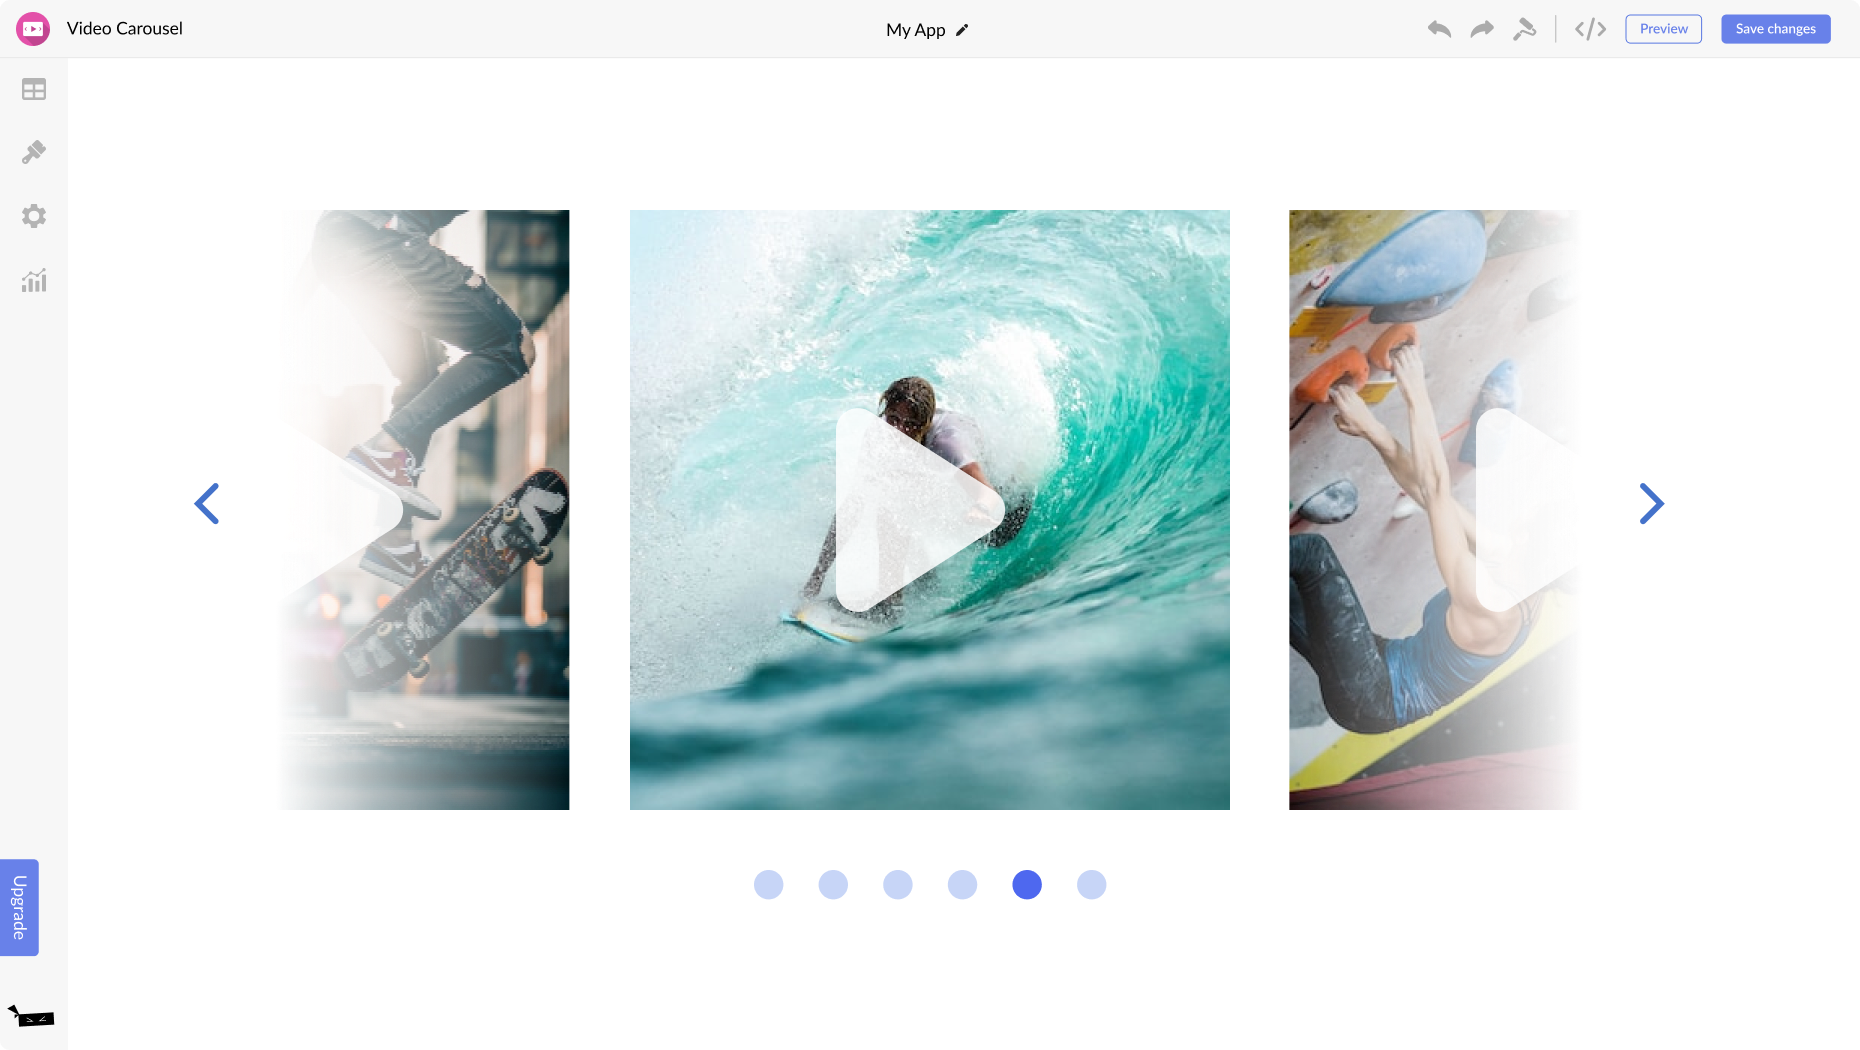 Video Carousel for Uscreen